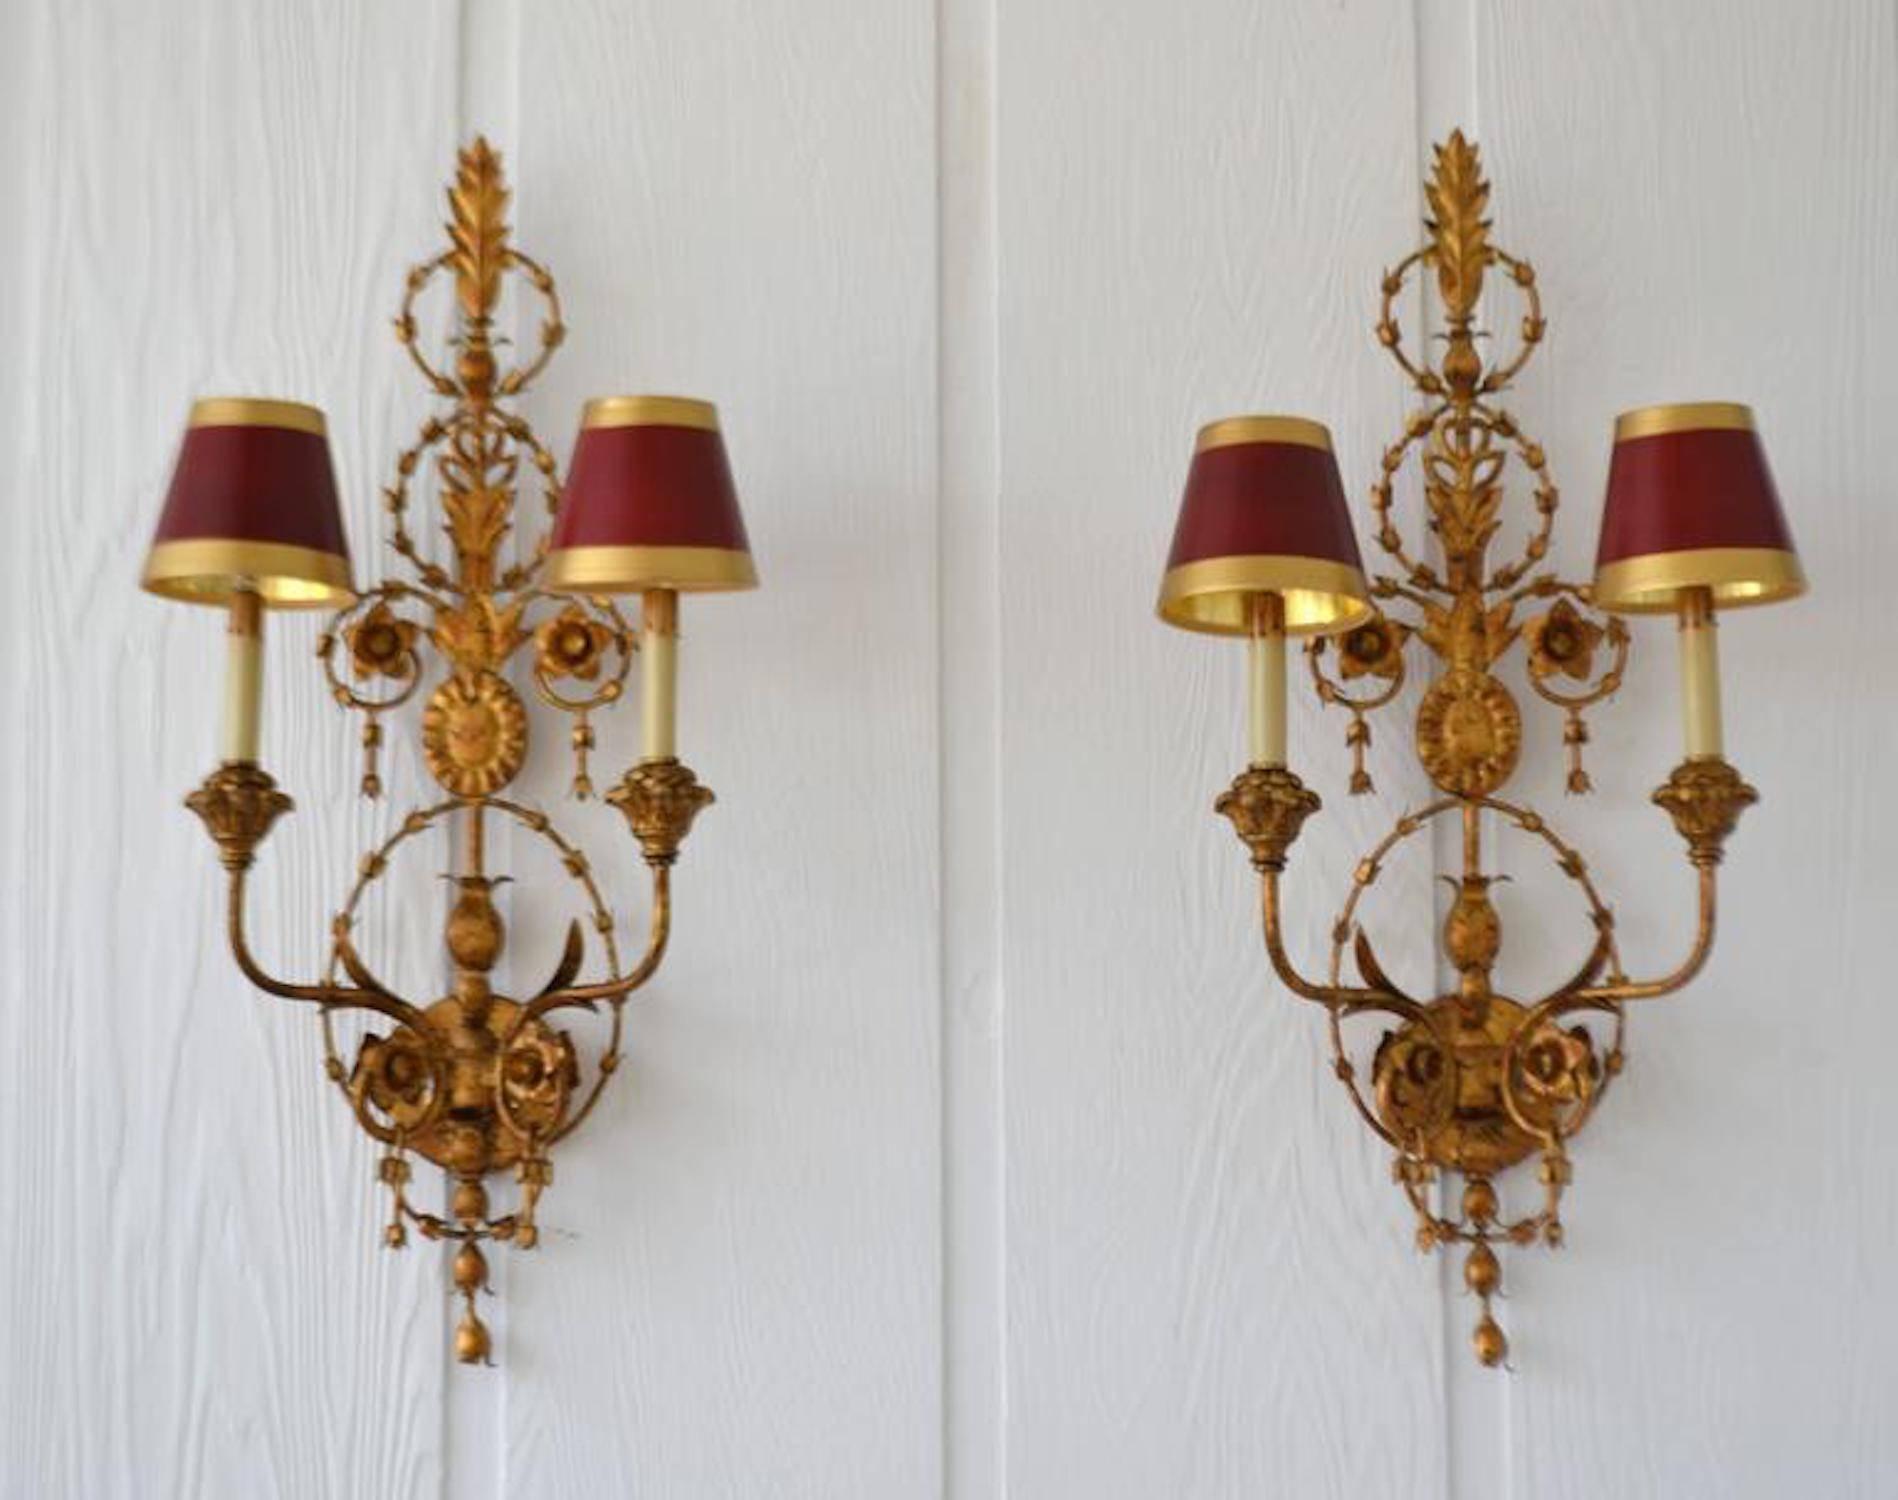 Stunning pair of Italian neoclassical style hand-wrought gilt metal two-arm sconces, circa 1950s-1960s. These stunning decorative two-light sconces are designed with hand-carved giltwood accents and parchment paper shades.